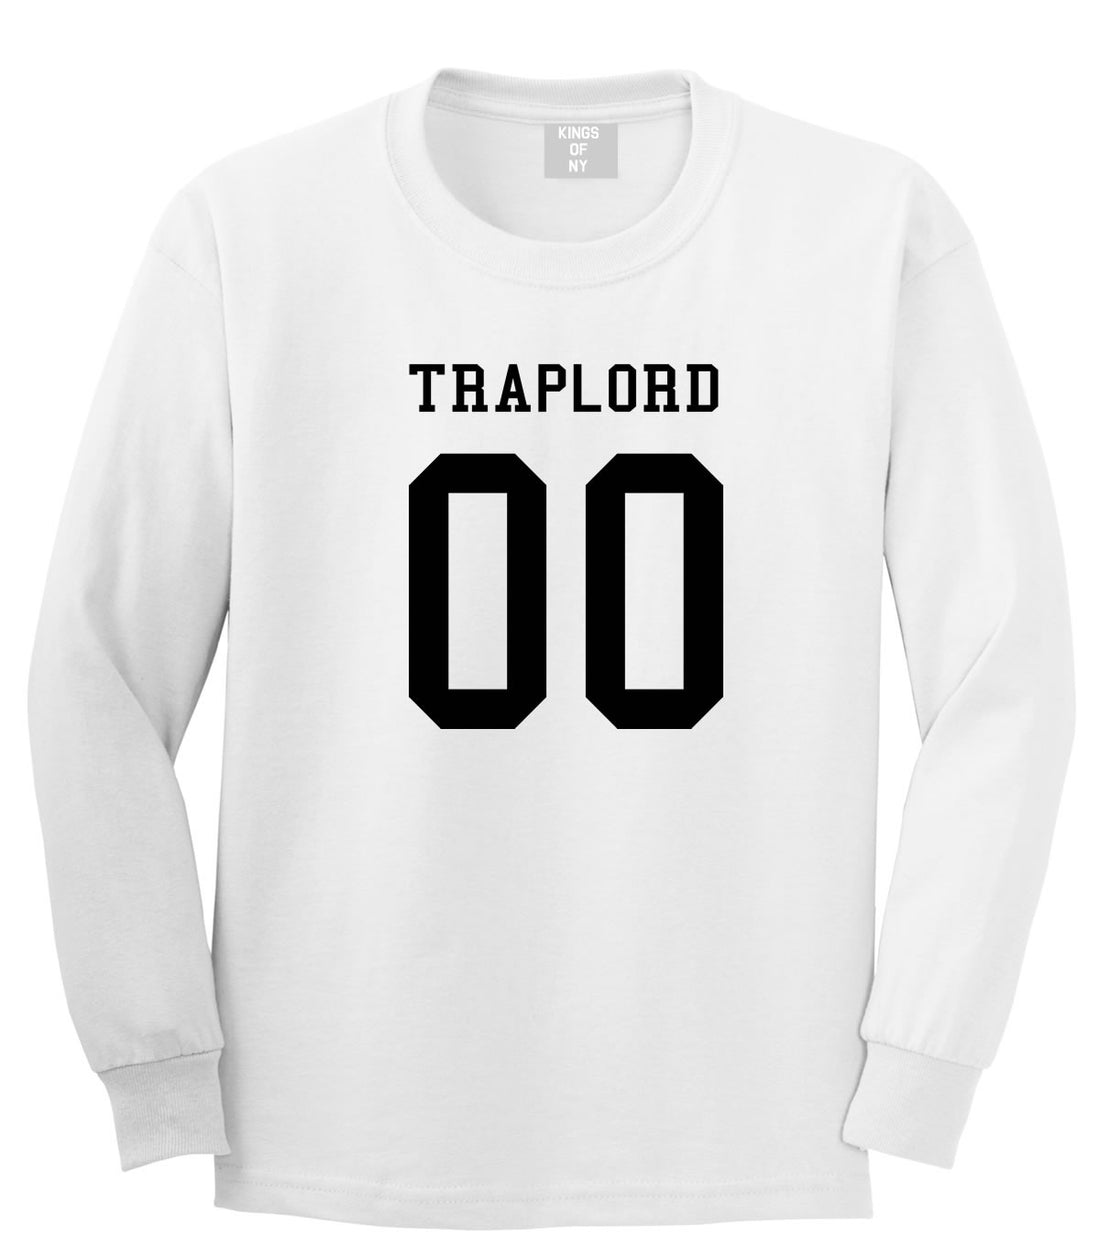 Traplord Team Jersey 00 Trap Lord Long Sleeve T-Shirt in White By Kings Of NY